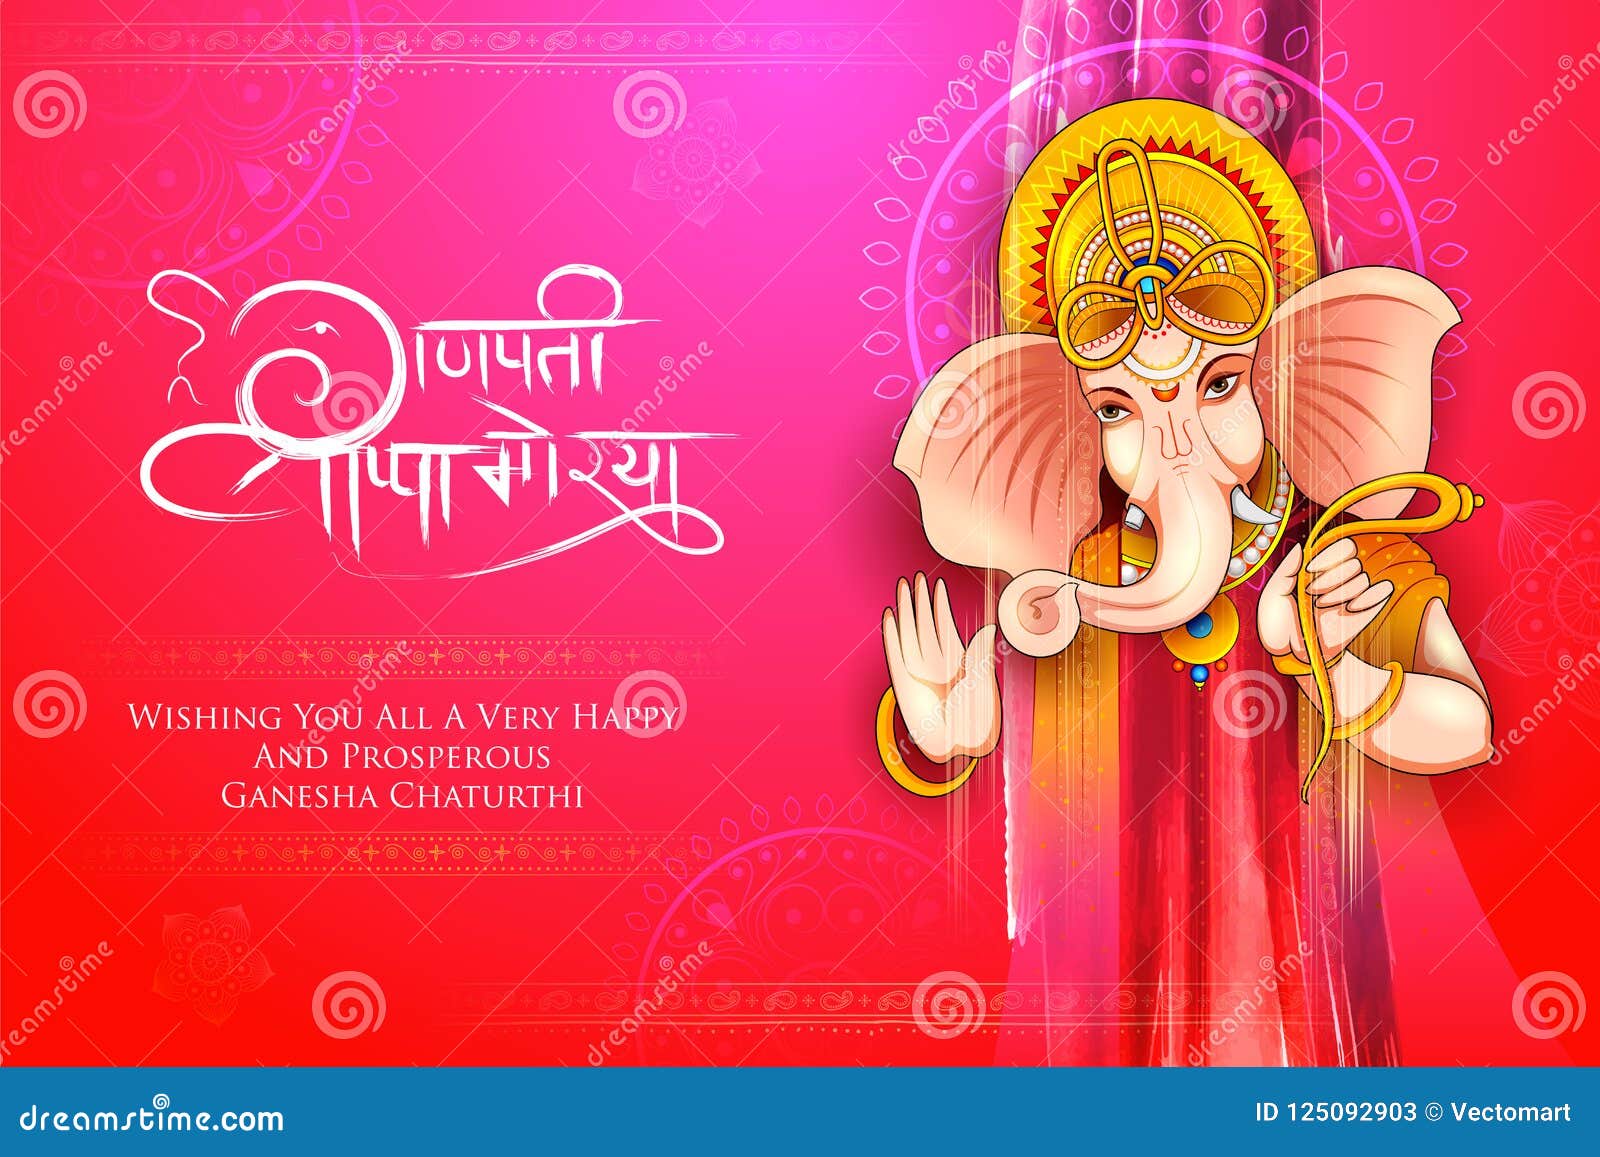 33316 Lord Ganesha Background Images Stock Photos  Vectors  Shutterstock